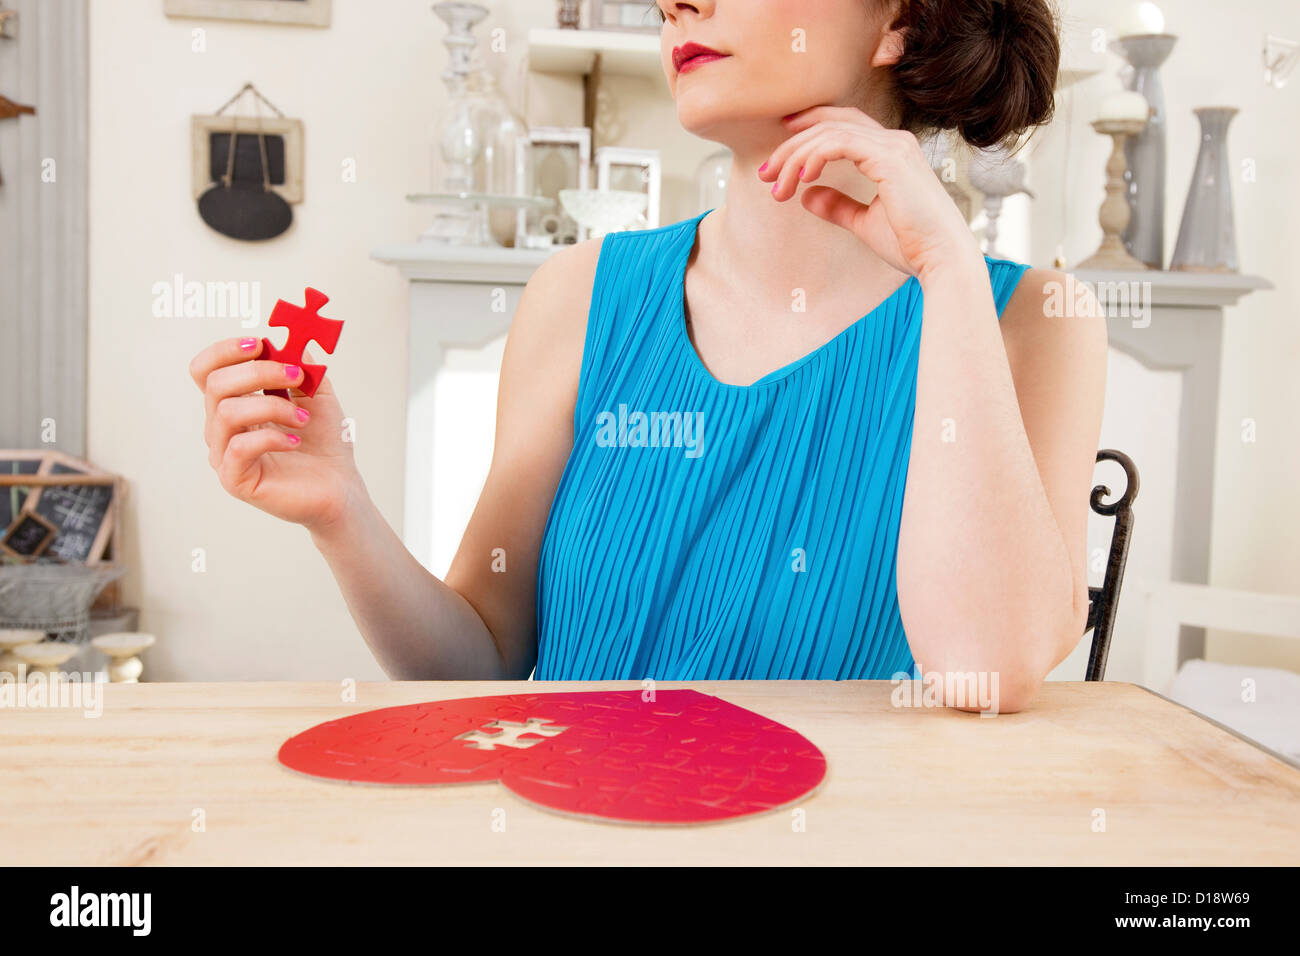 Woman doing heart shaped jigsaw puzzle holding piece Stock Photo